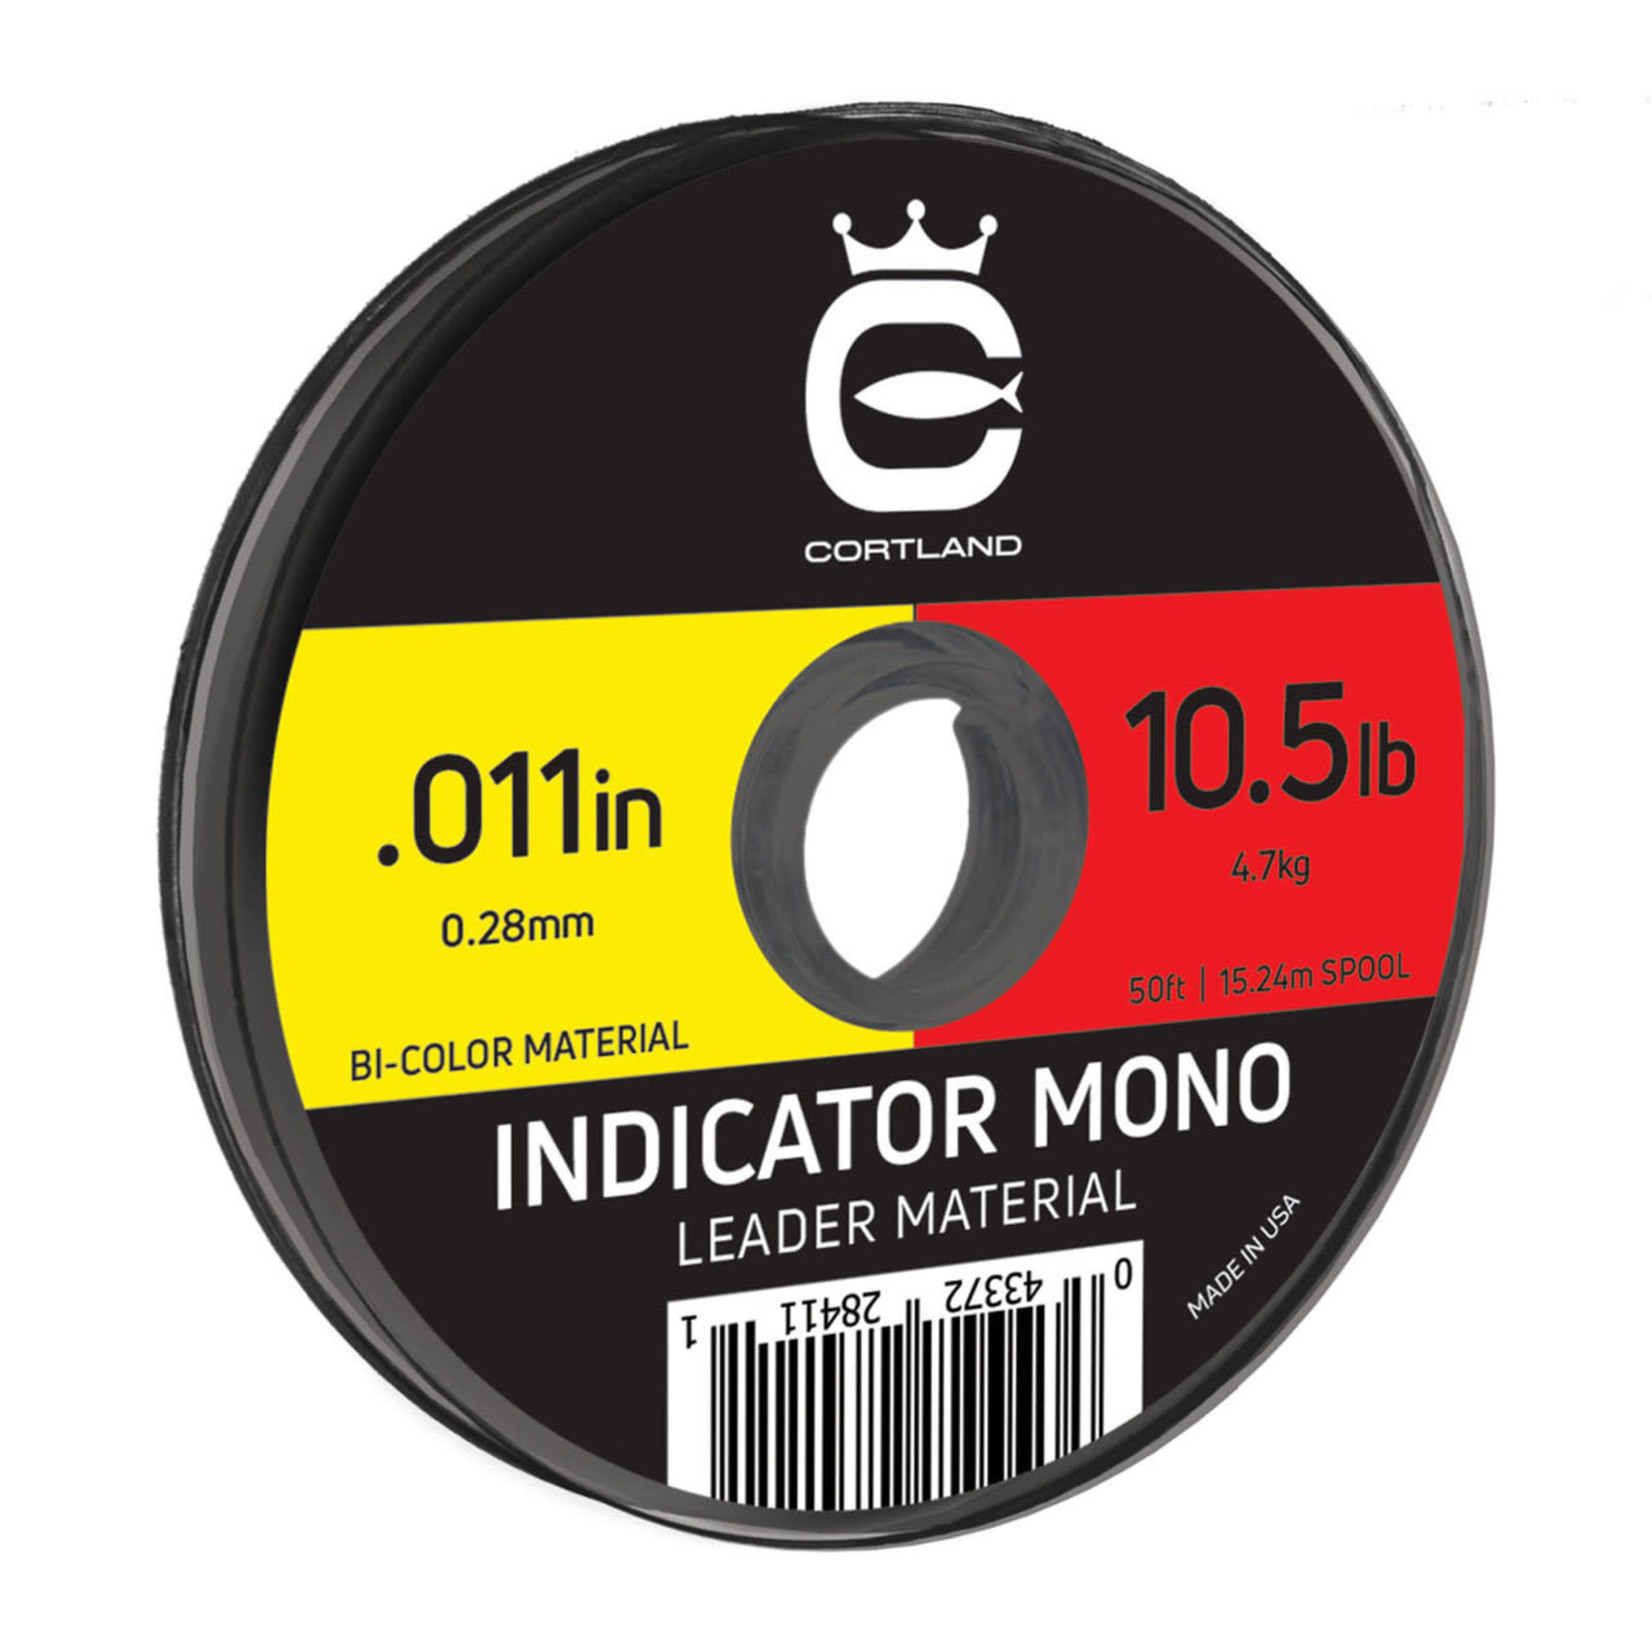 Cortland Indicator Mono Leader Material Bi-Color Red and Yellow